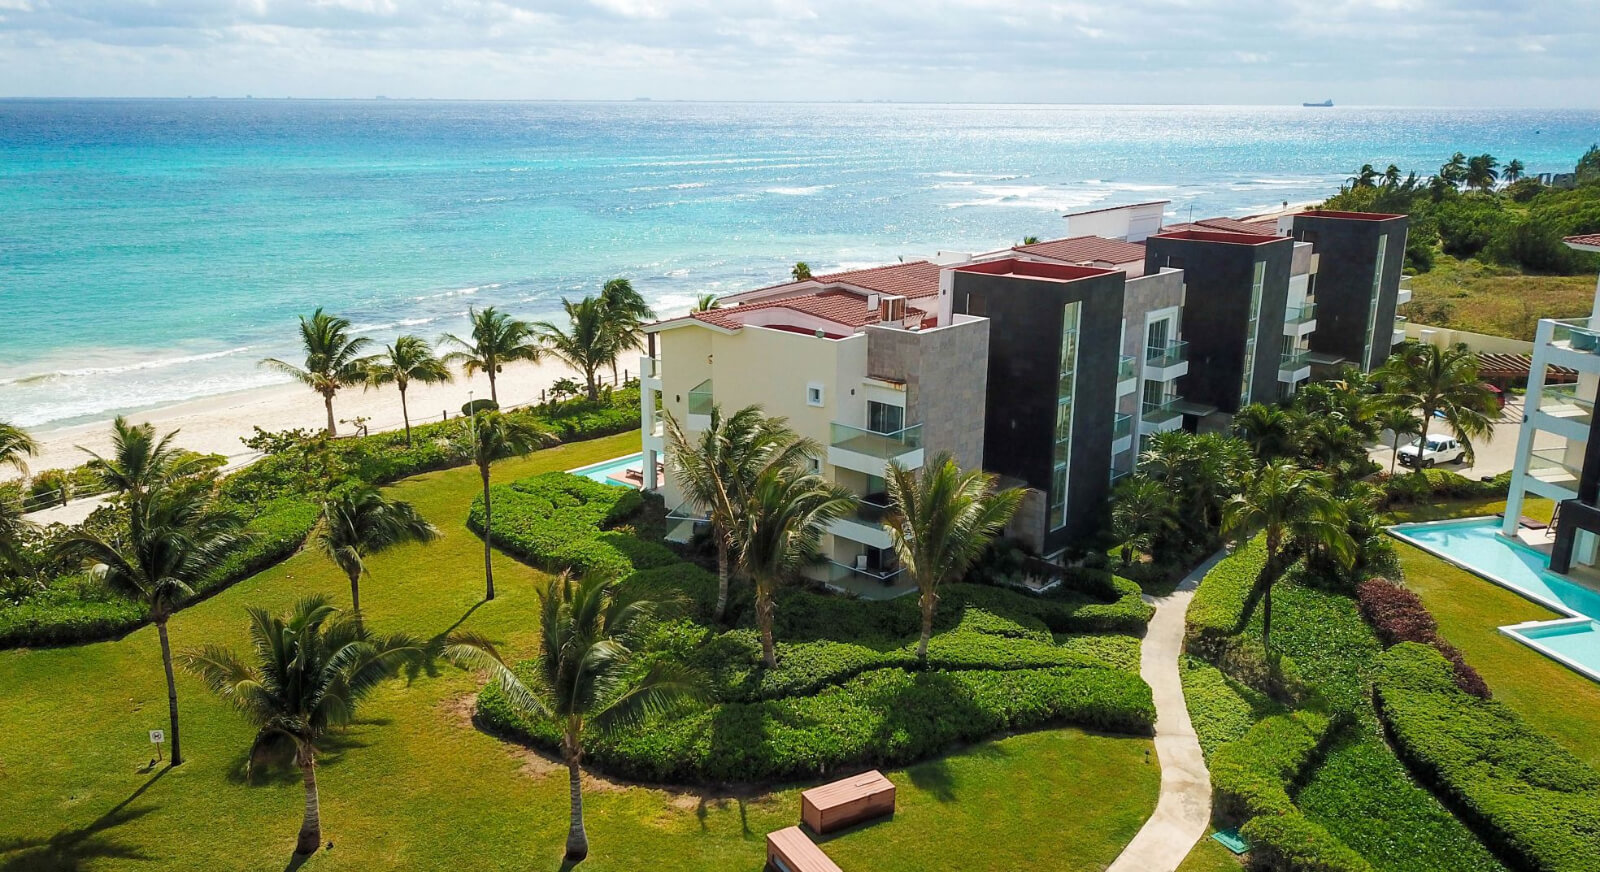 Ocean view penthouse with private jacuzzi. 3,000 m2 of pools, golf course, beach club, great emenities, for sale Playa del Carmen.